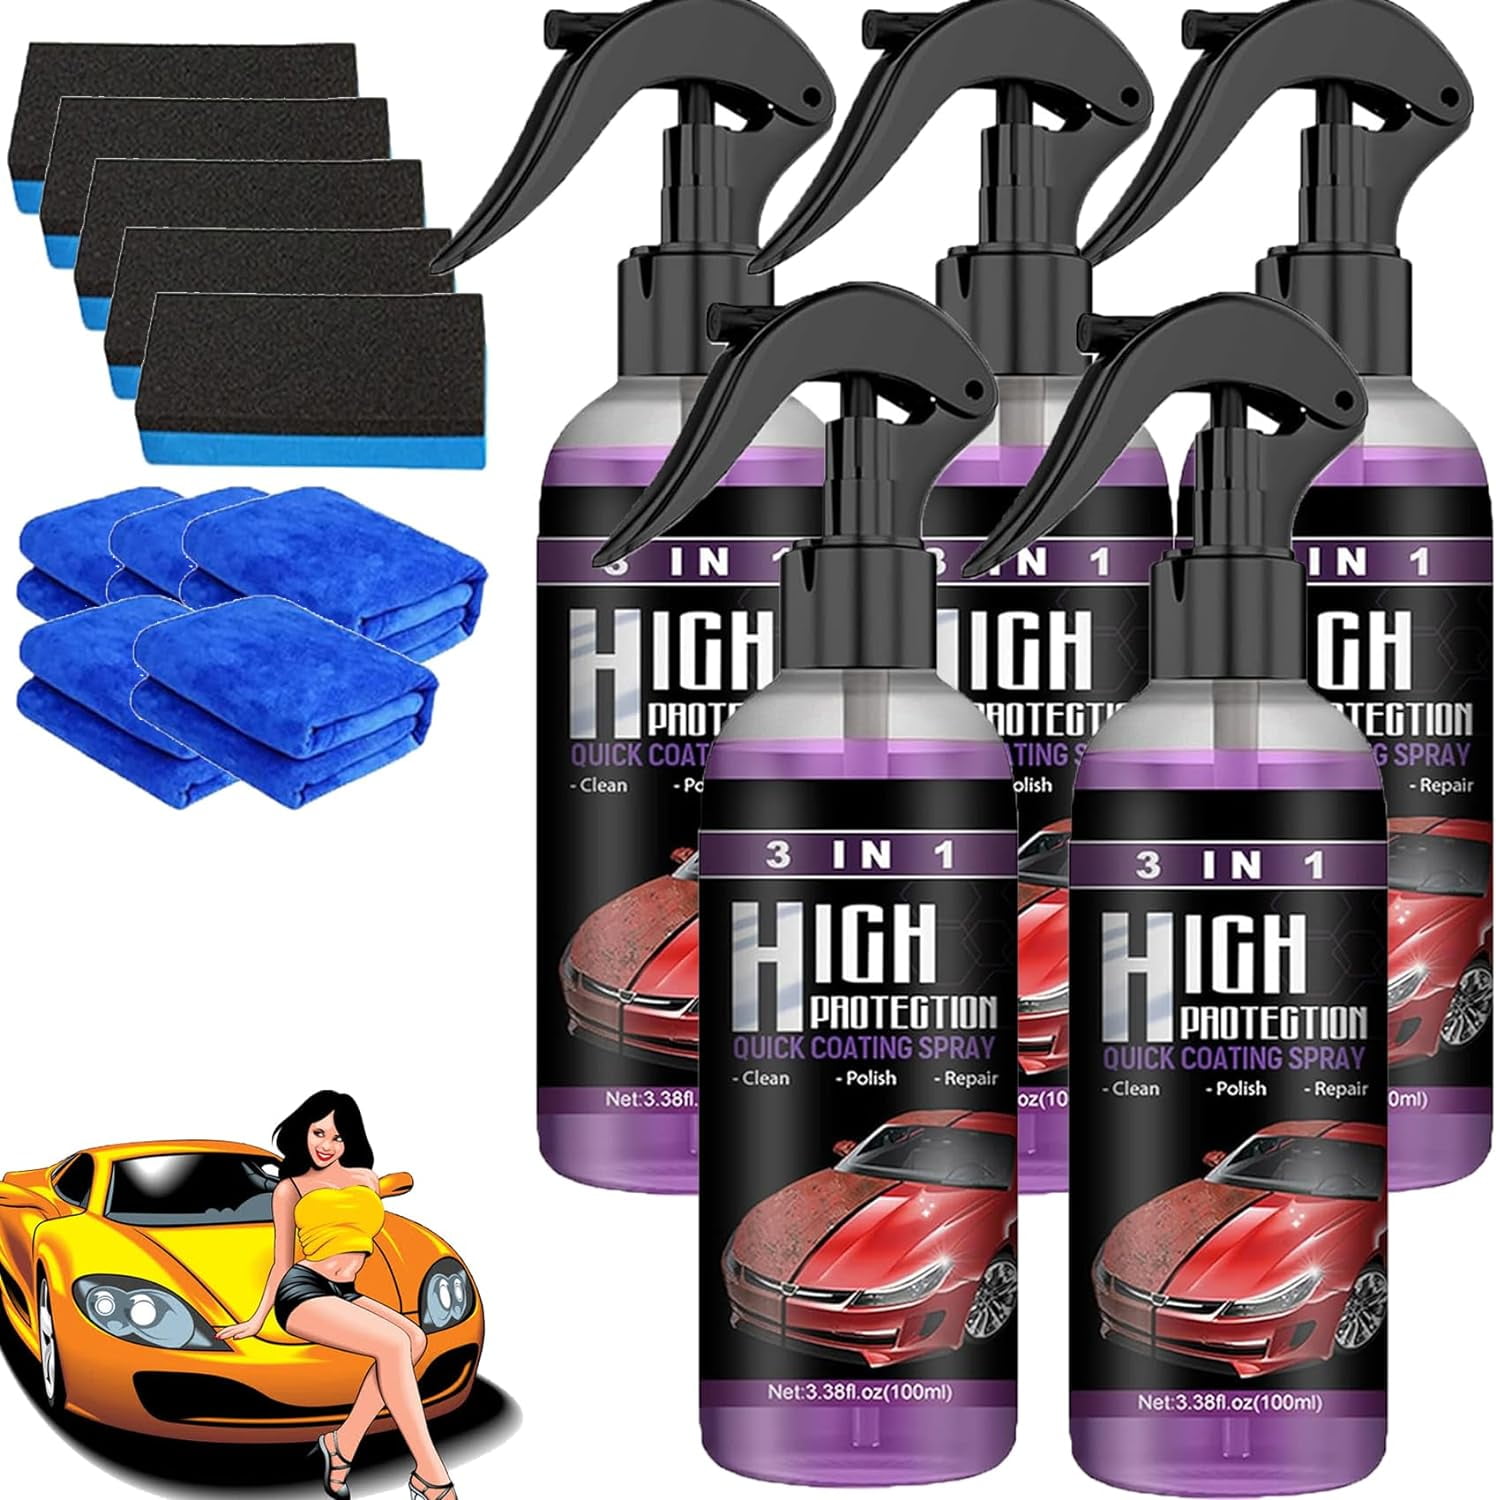 3 IN 1 High Protection Car Spray (Pack of 2) - Shop Trend at Rs